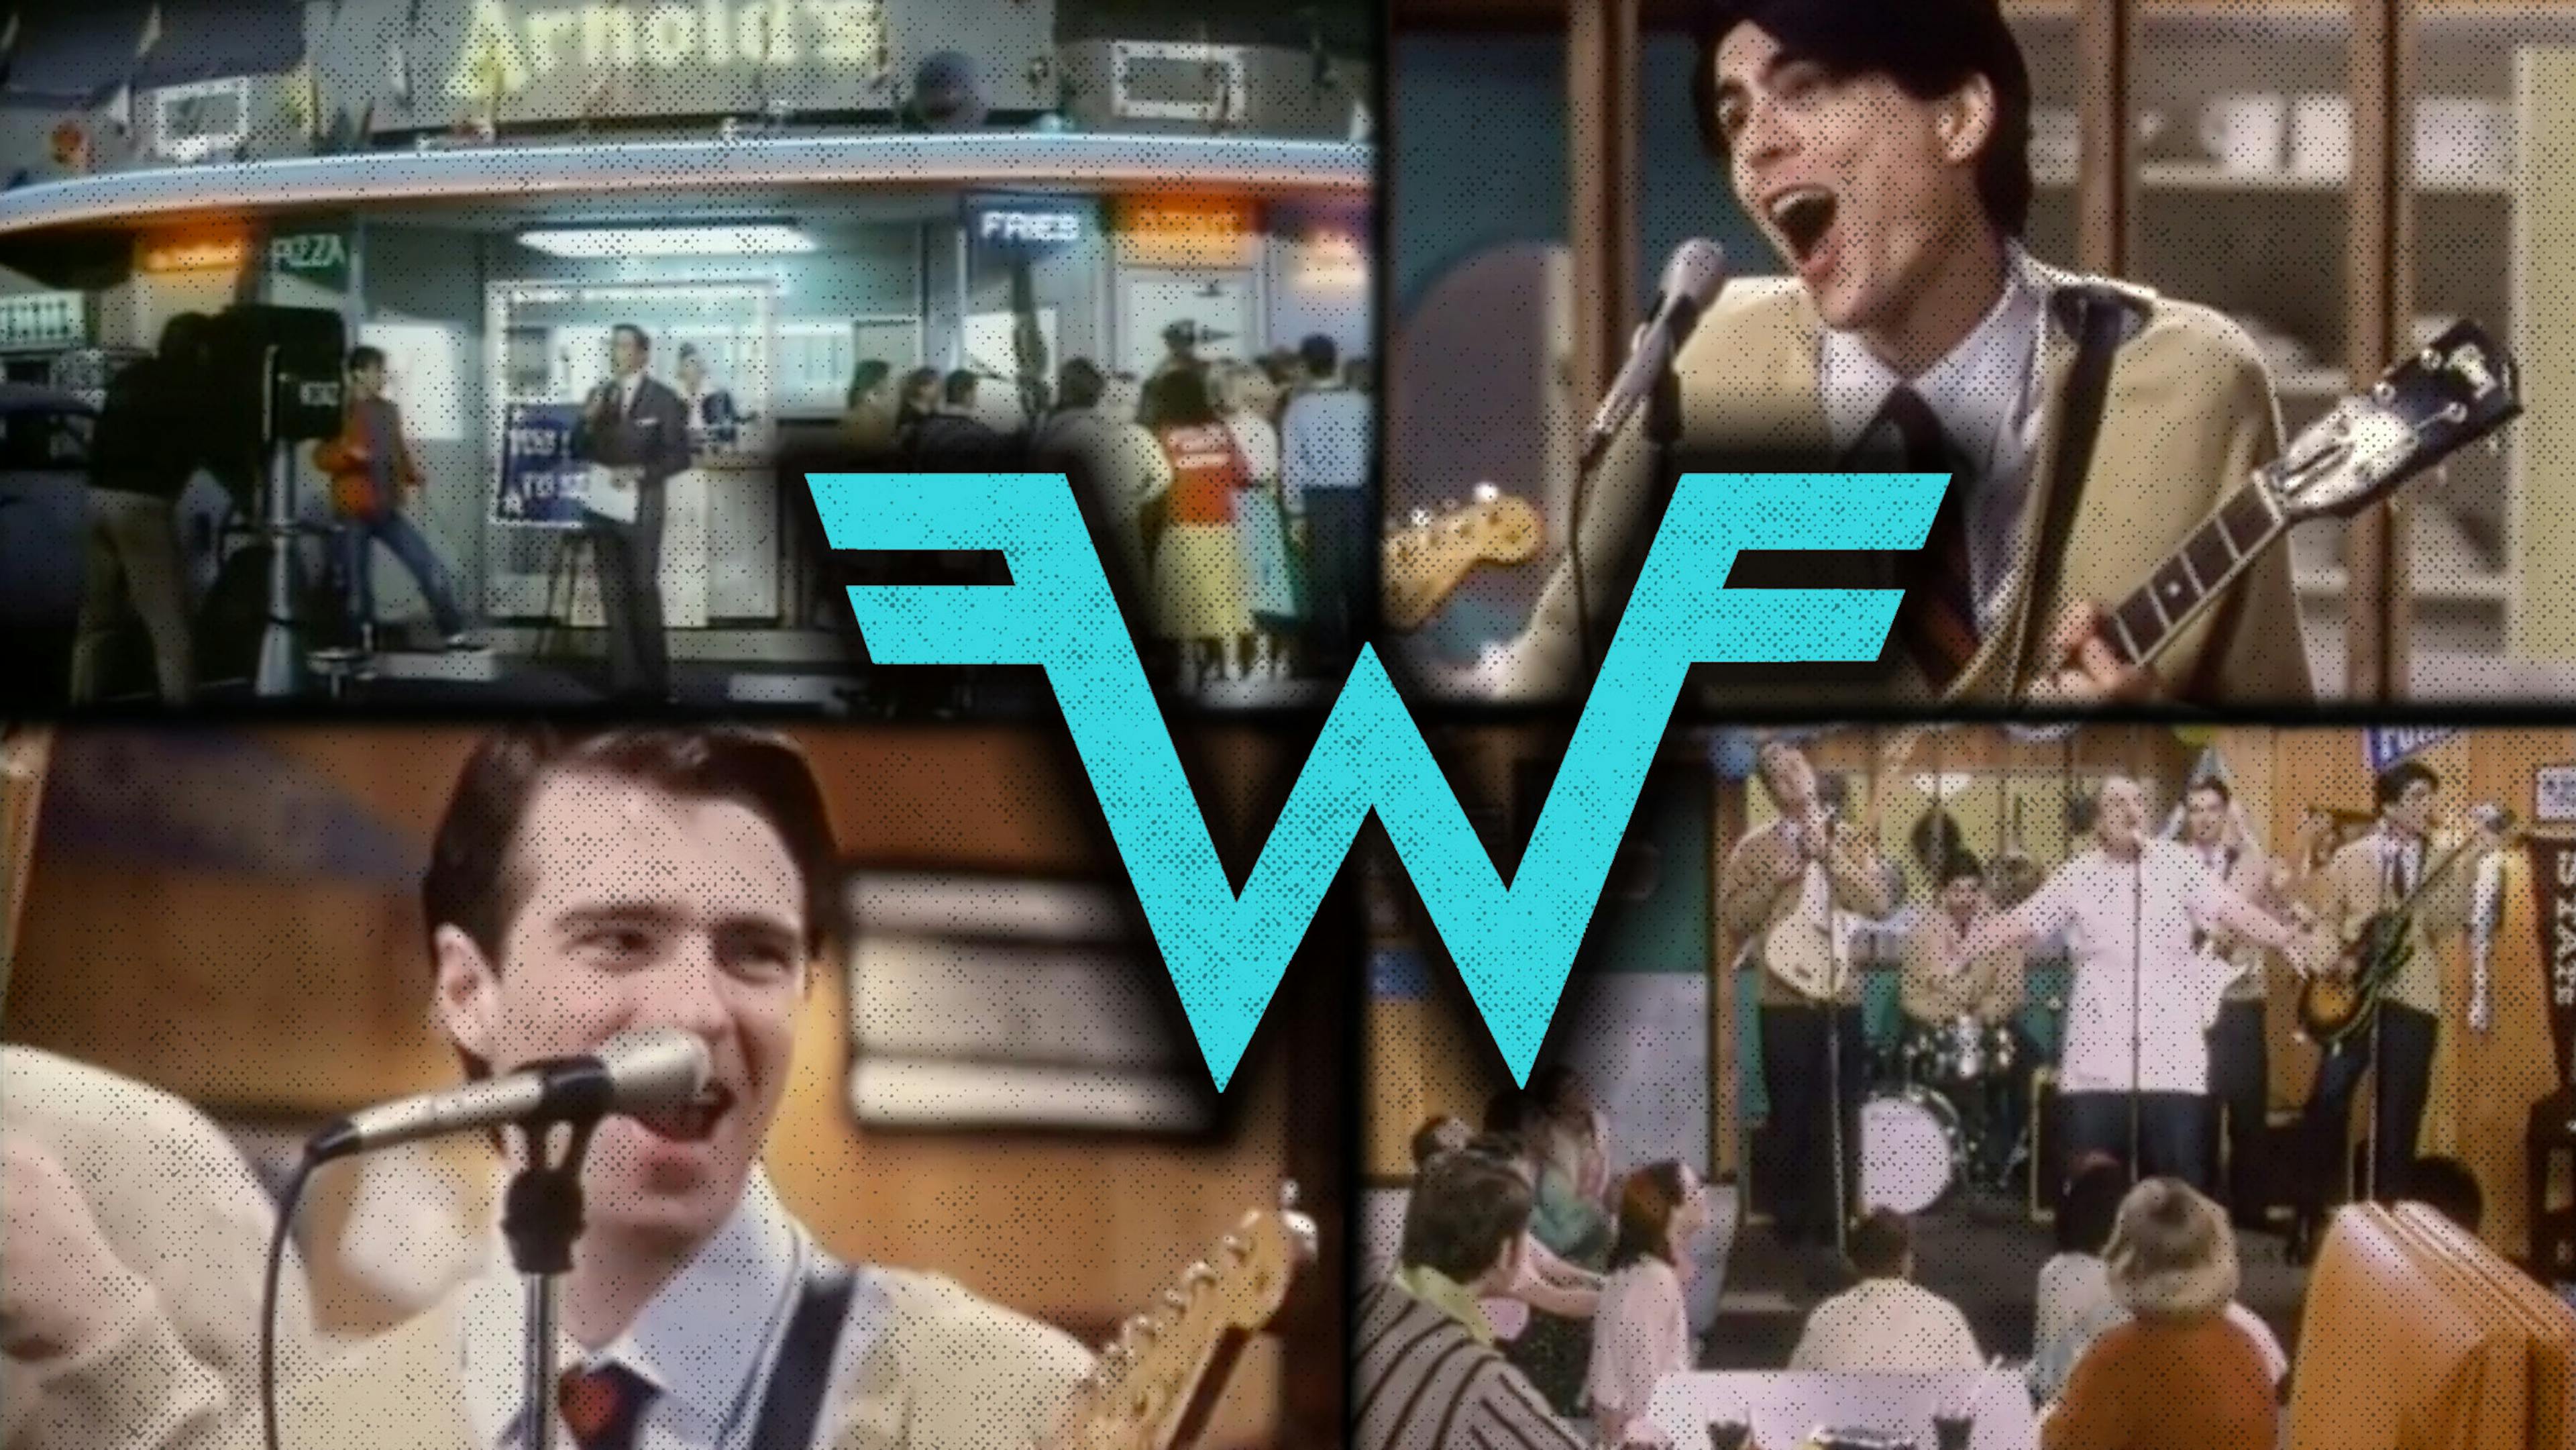 A deep dive into Weezer’s Buddy Holly music video